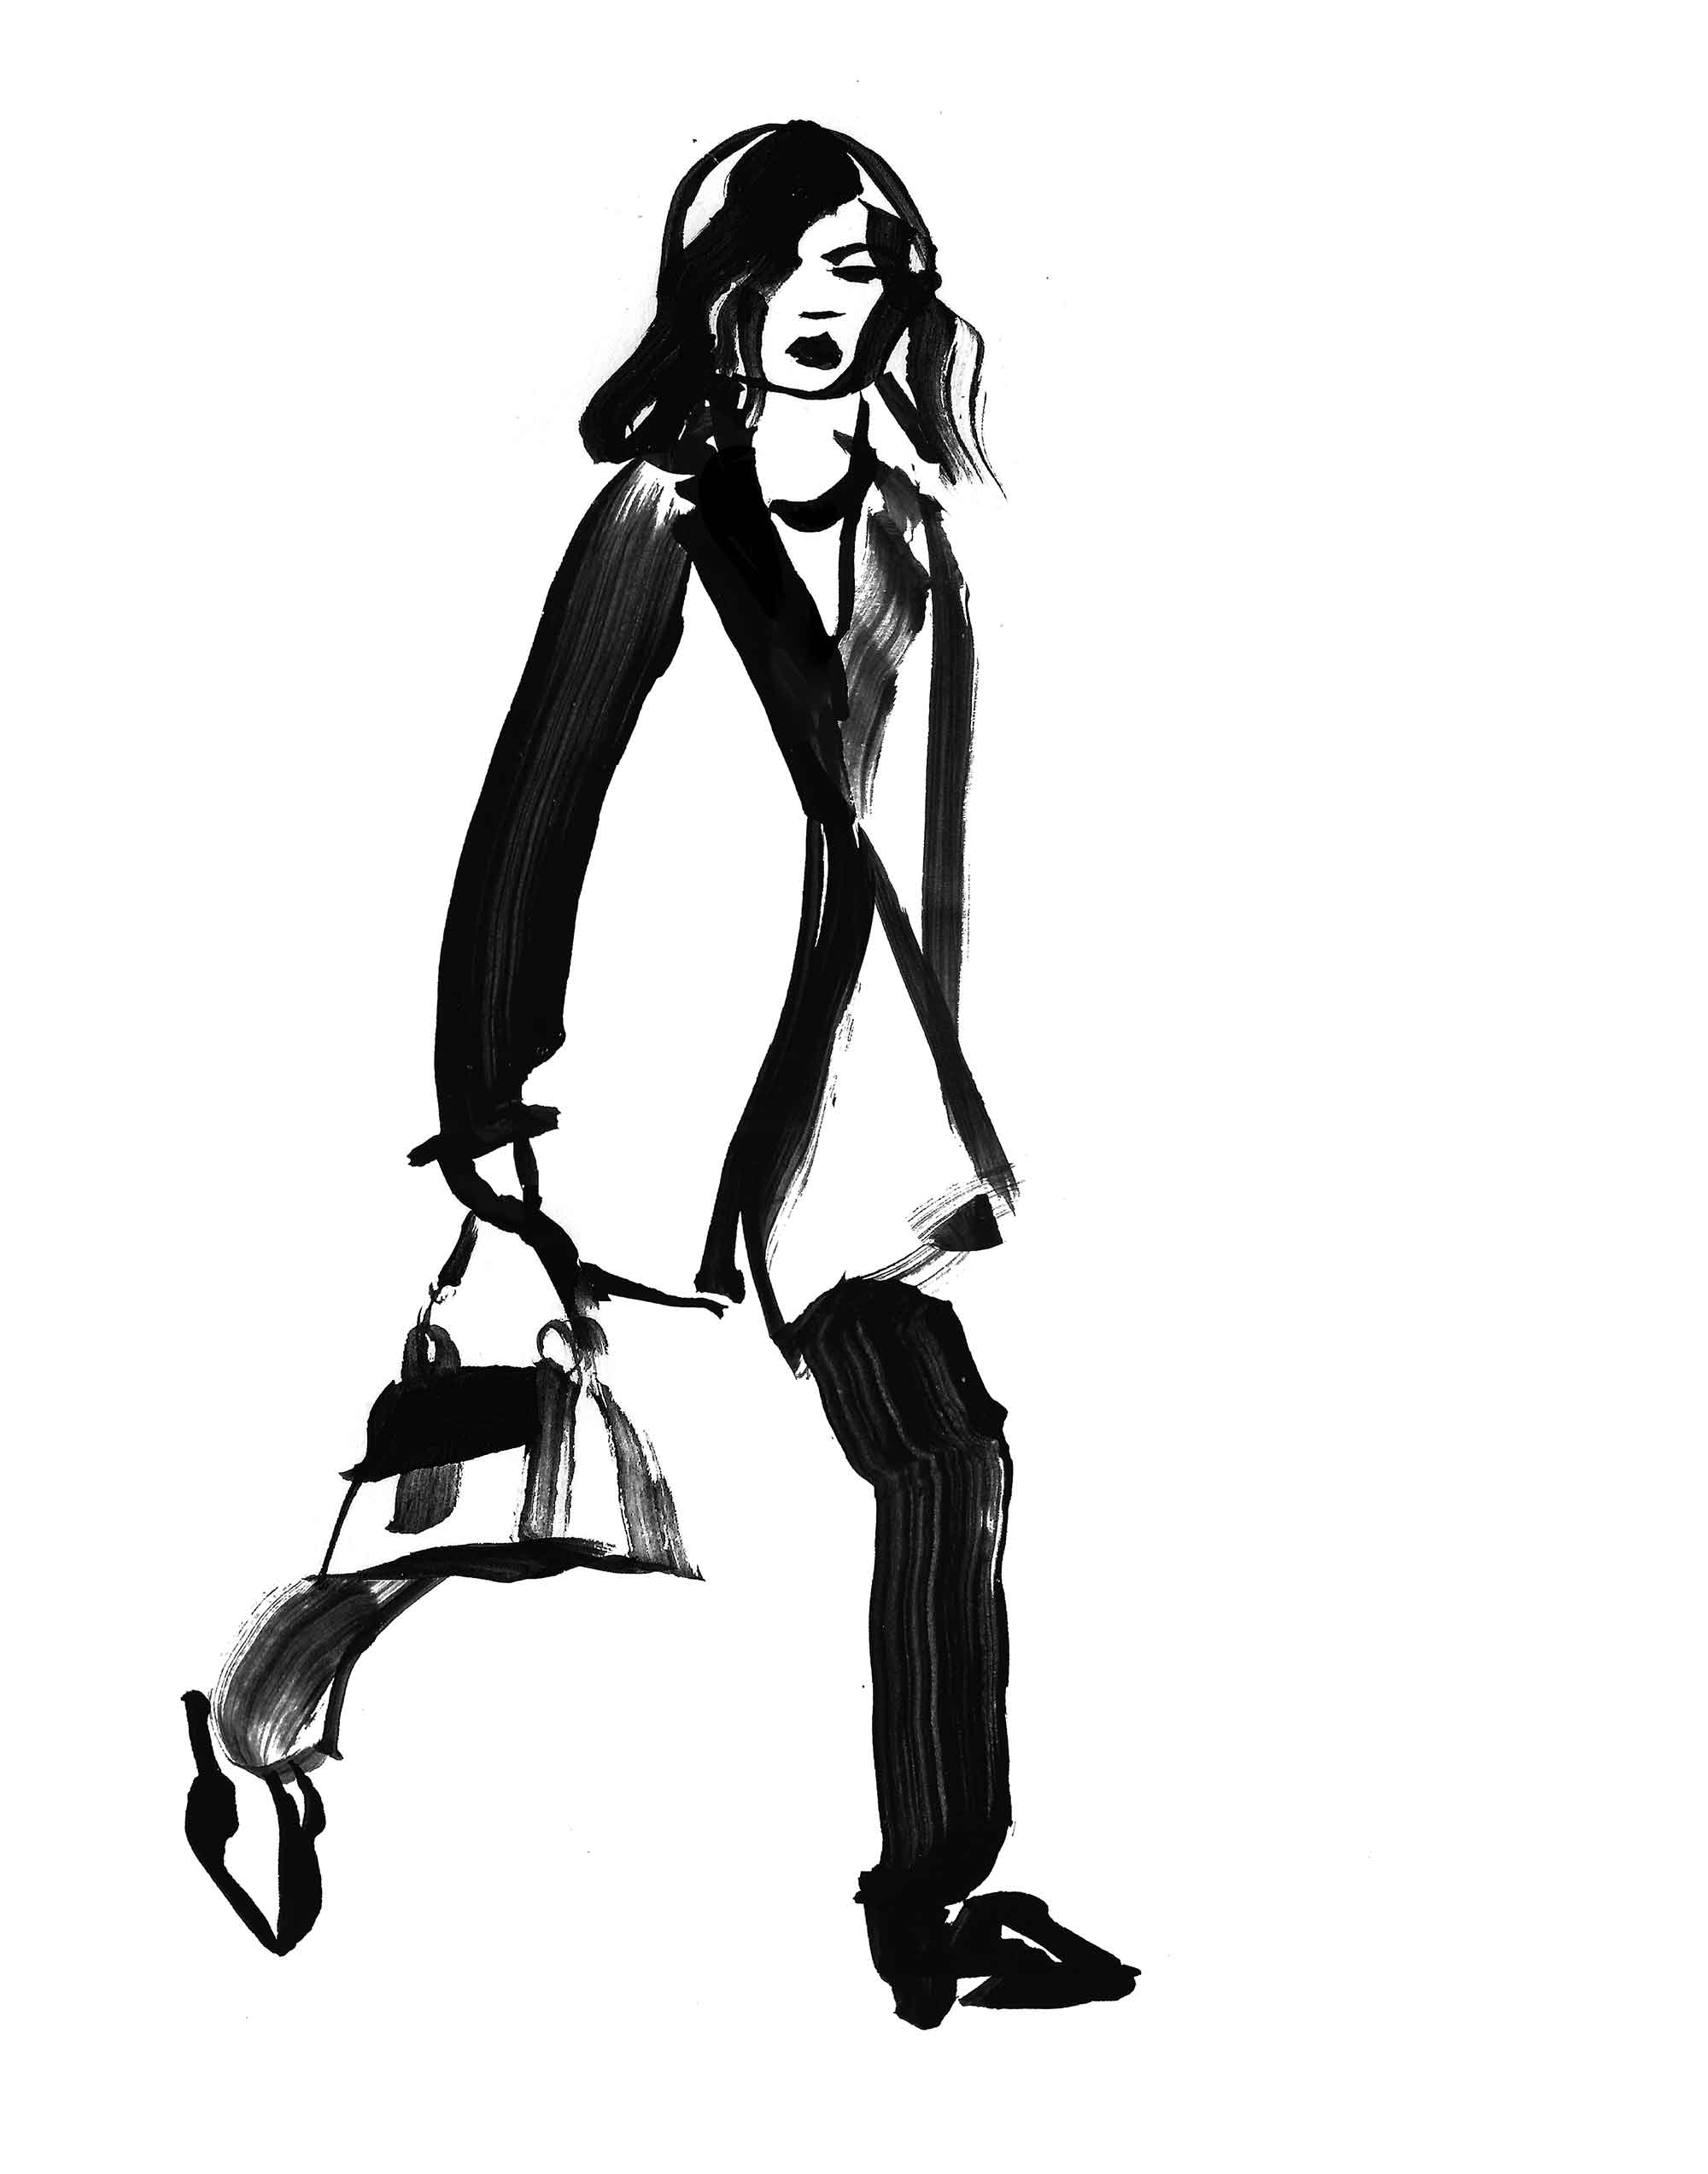 A woman illustrated in black ink, simple monochrome drawing with brishstrokes. Fashion illustration inspired. Drawn in  inky fashion illustration style by Caroline Tomlinson.